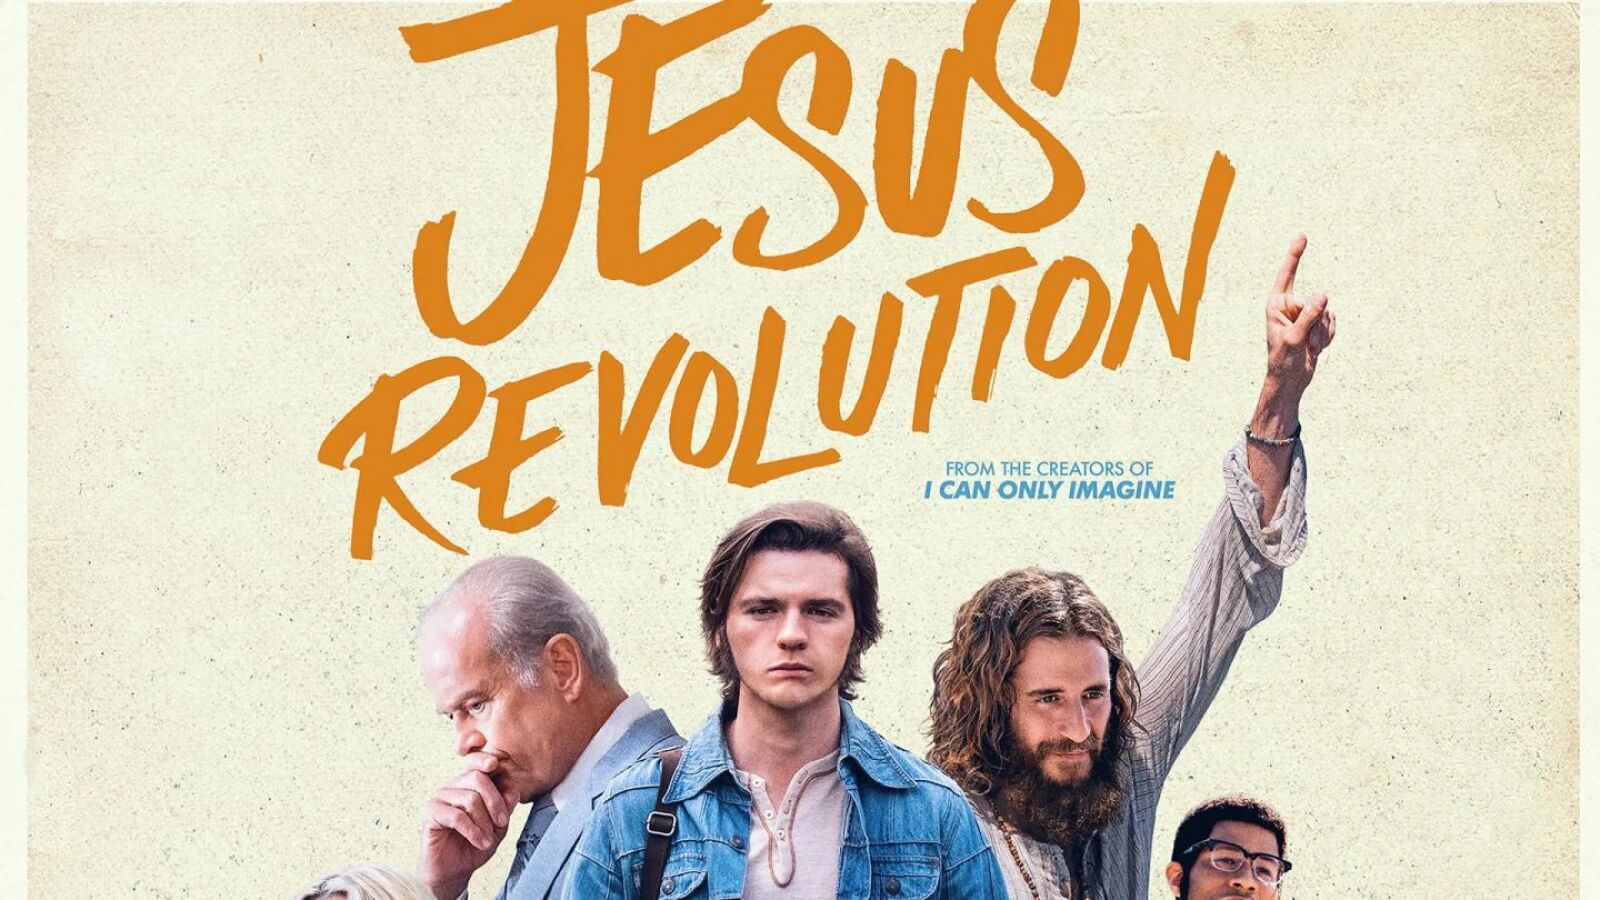 American film success now showing in several countries: “The world needs a Jesus revolution”